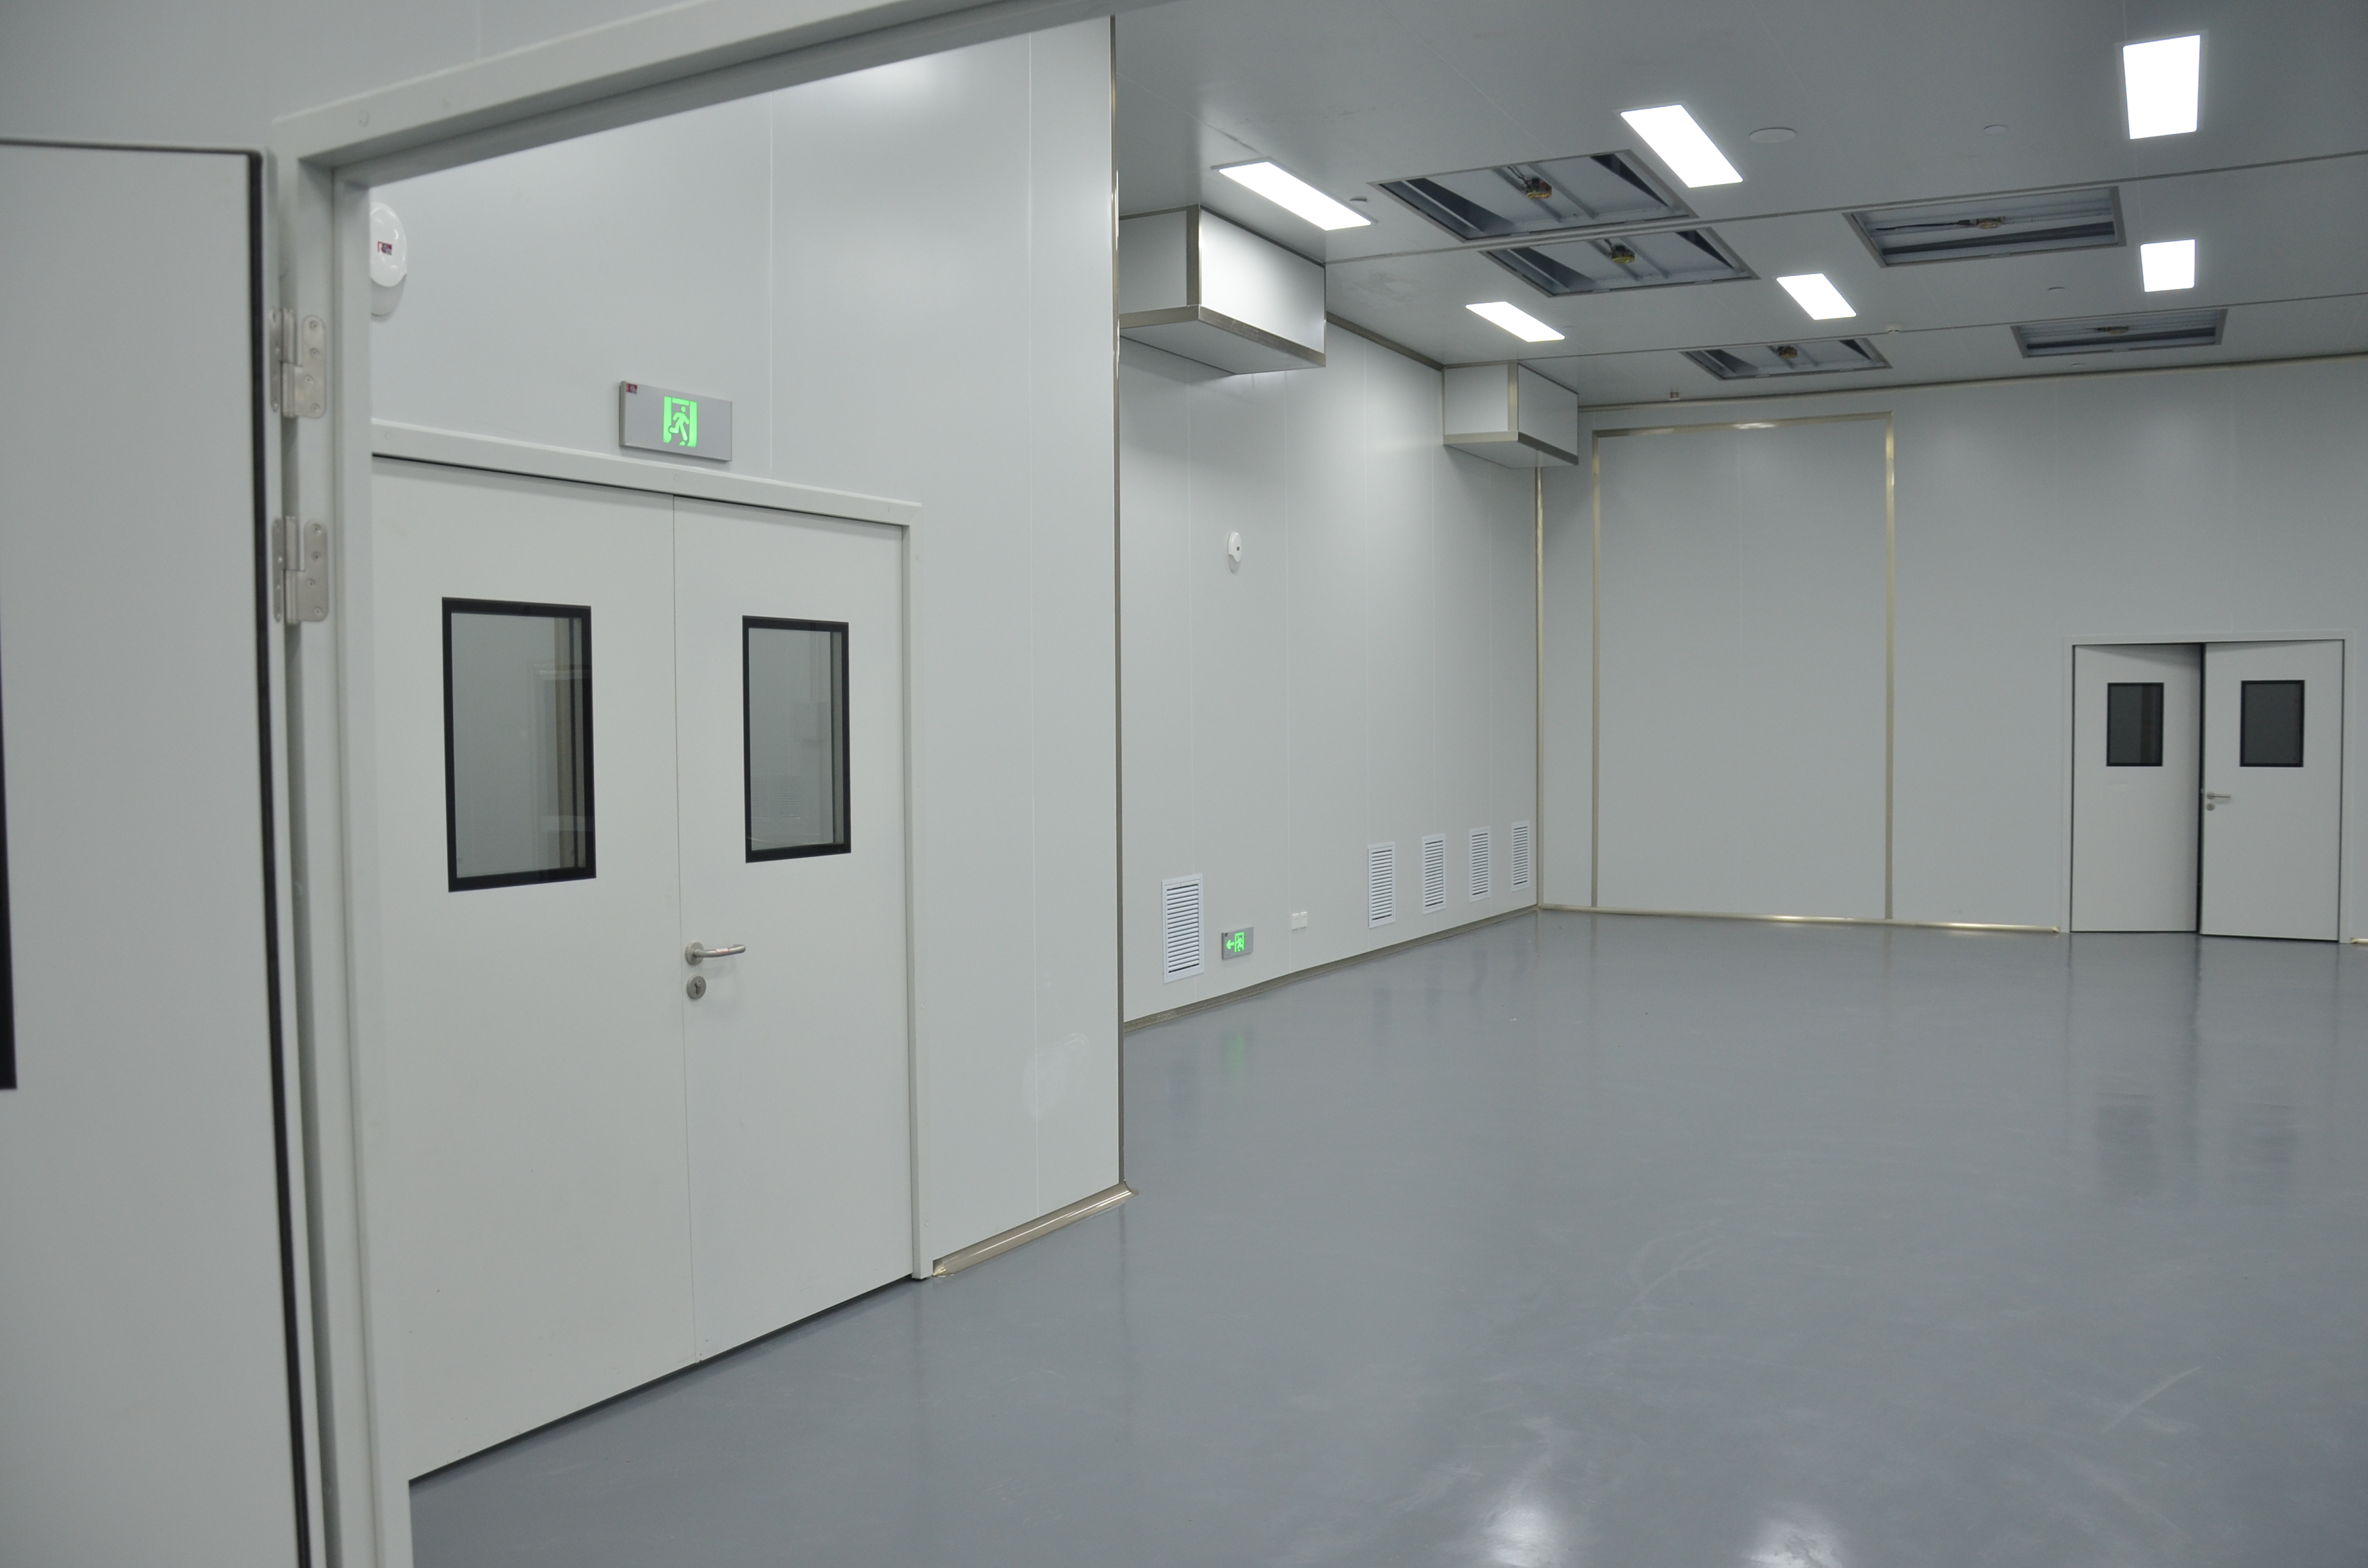 I-MICROELECTRONICS, I-CHIPS INDUSTRY CLEANROOM6